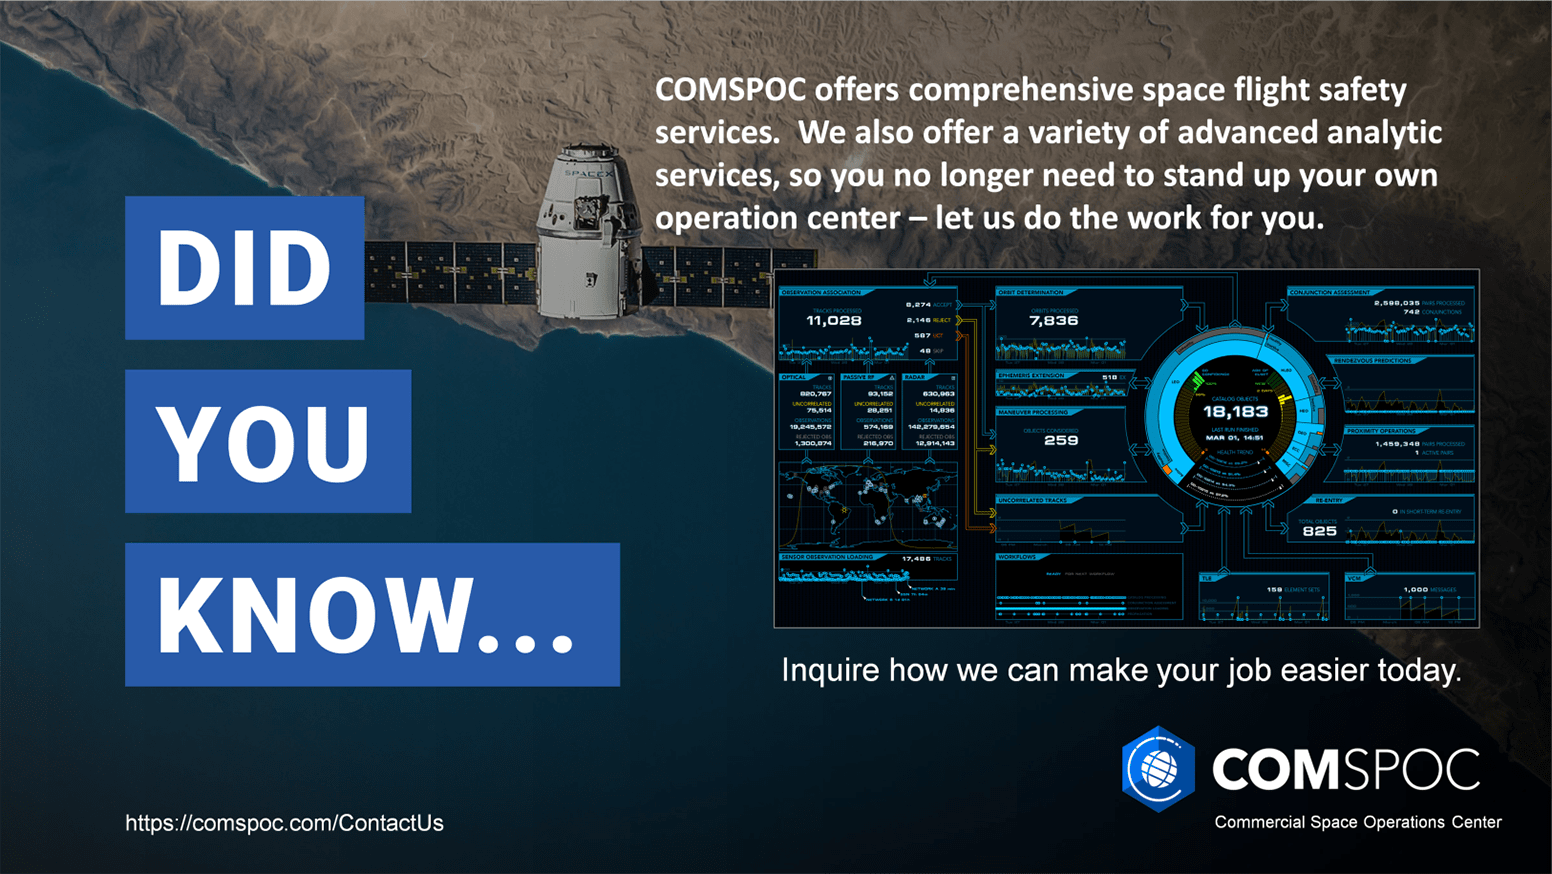 Did You Know: COMSPOC offers comprehensive space flight safety.